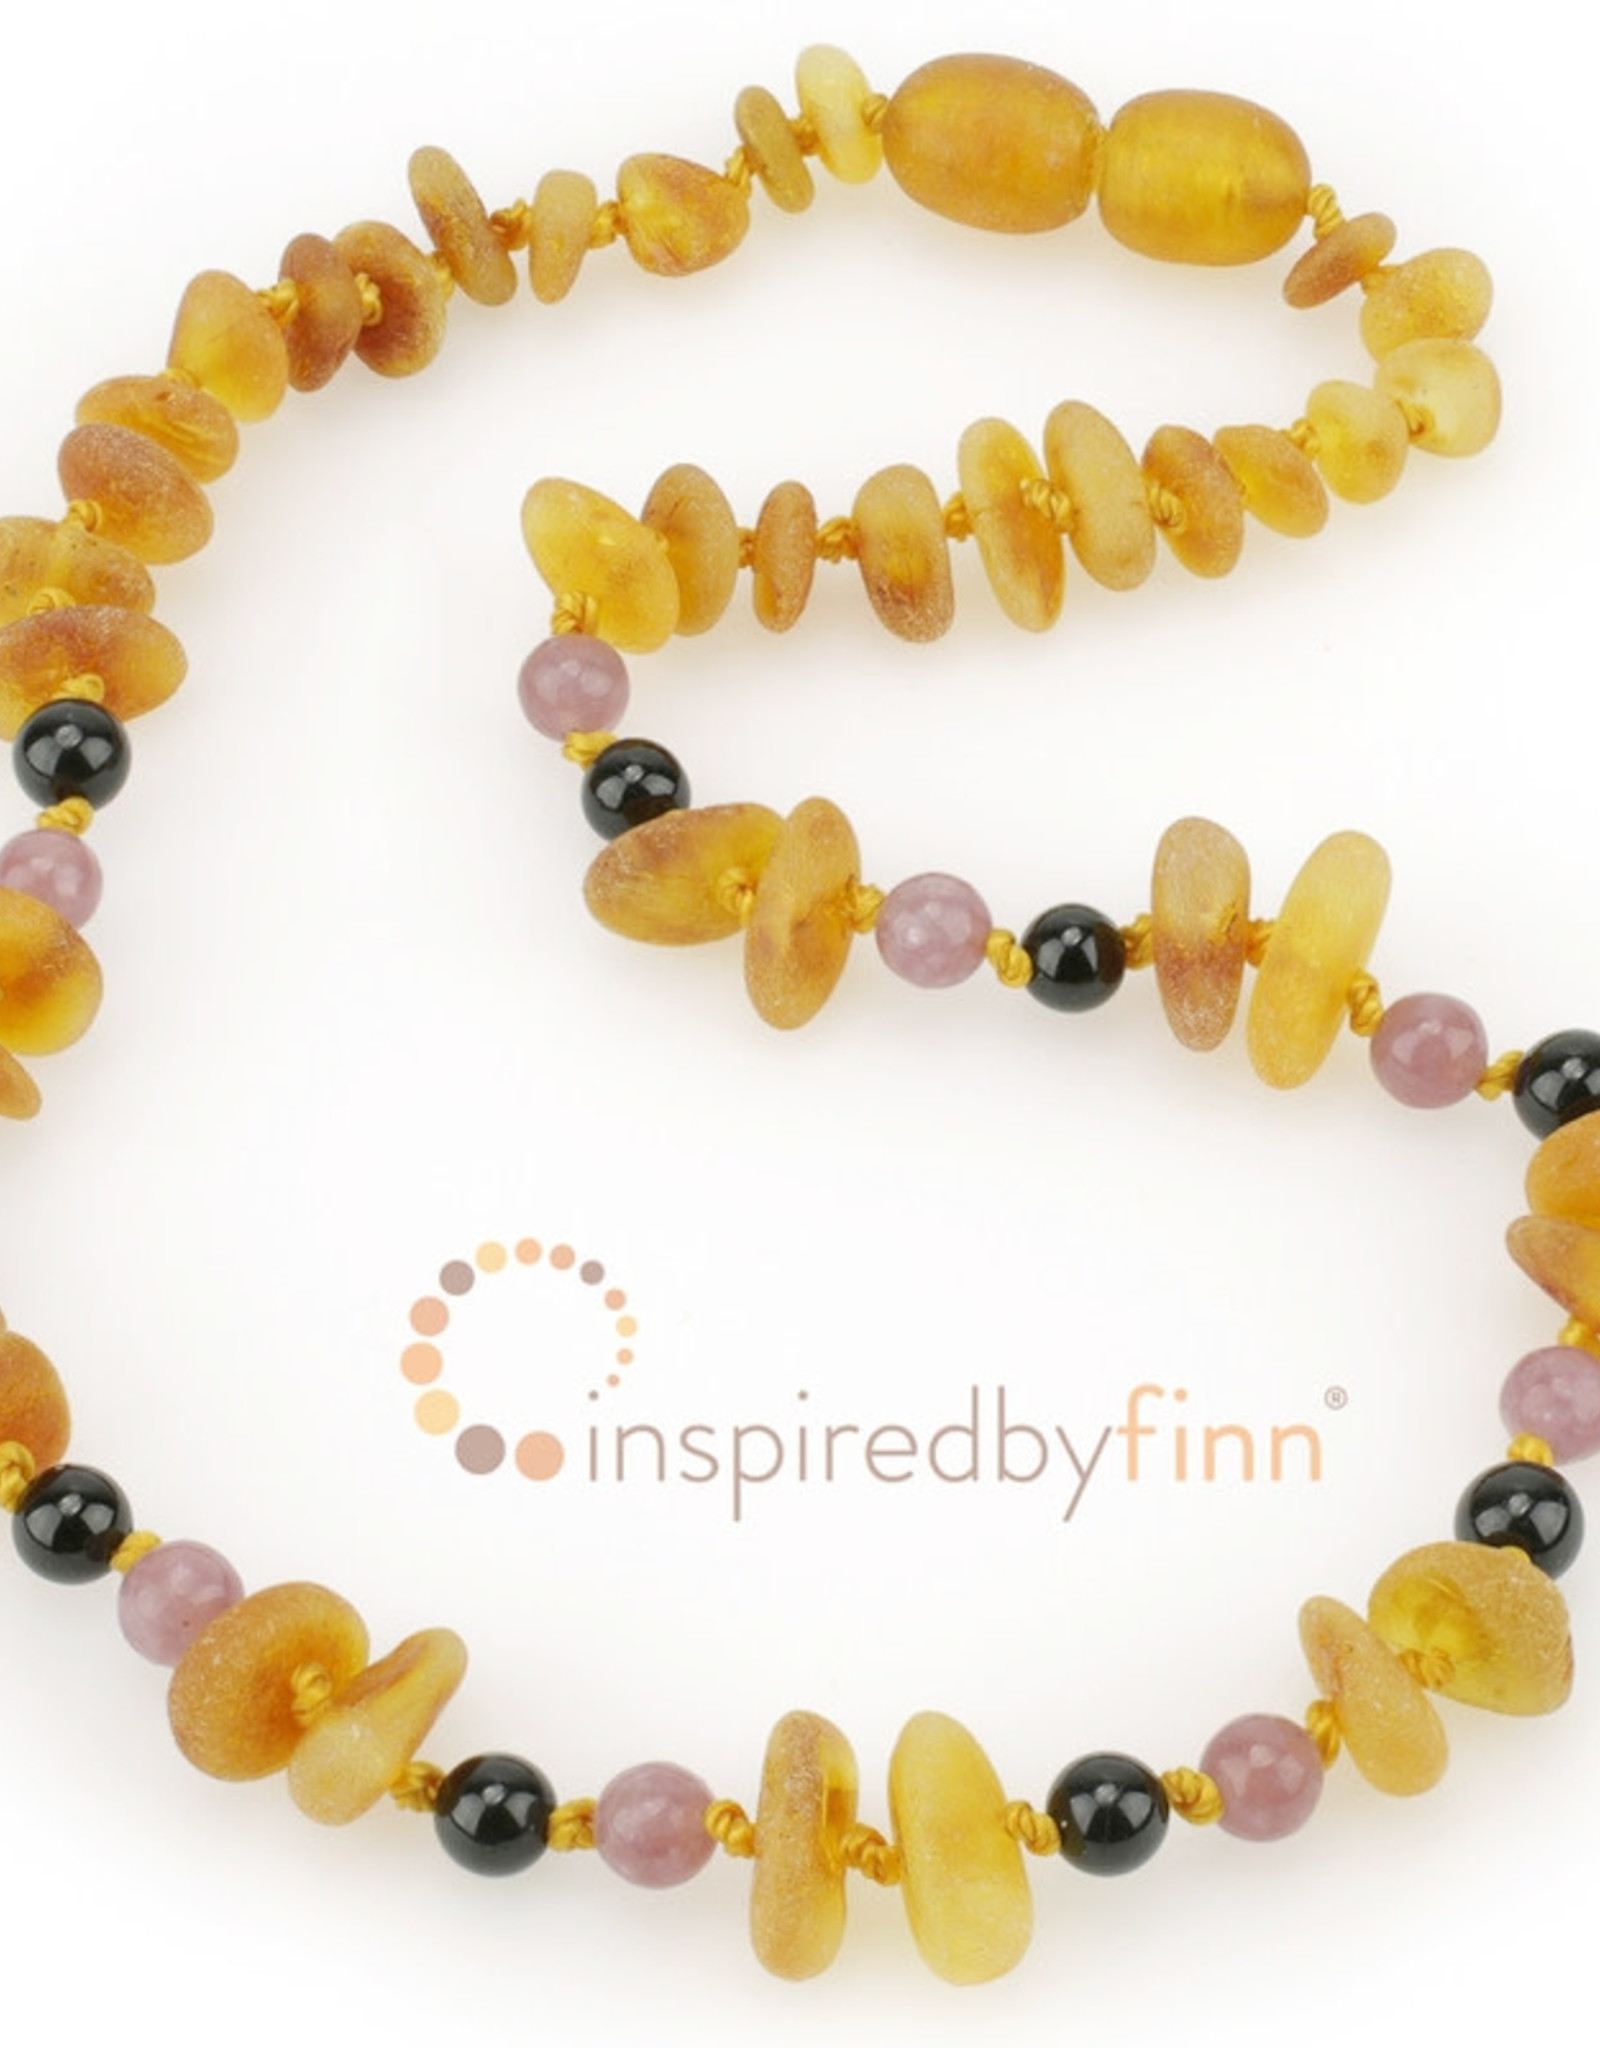 Inspired by Finn Baltic Amber Necklace - CurbsChipHarvest - unpolished - 11.5-12.5